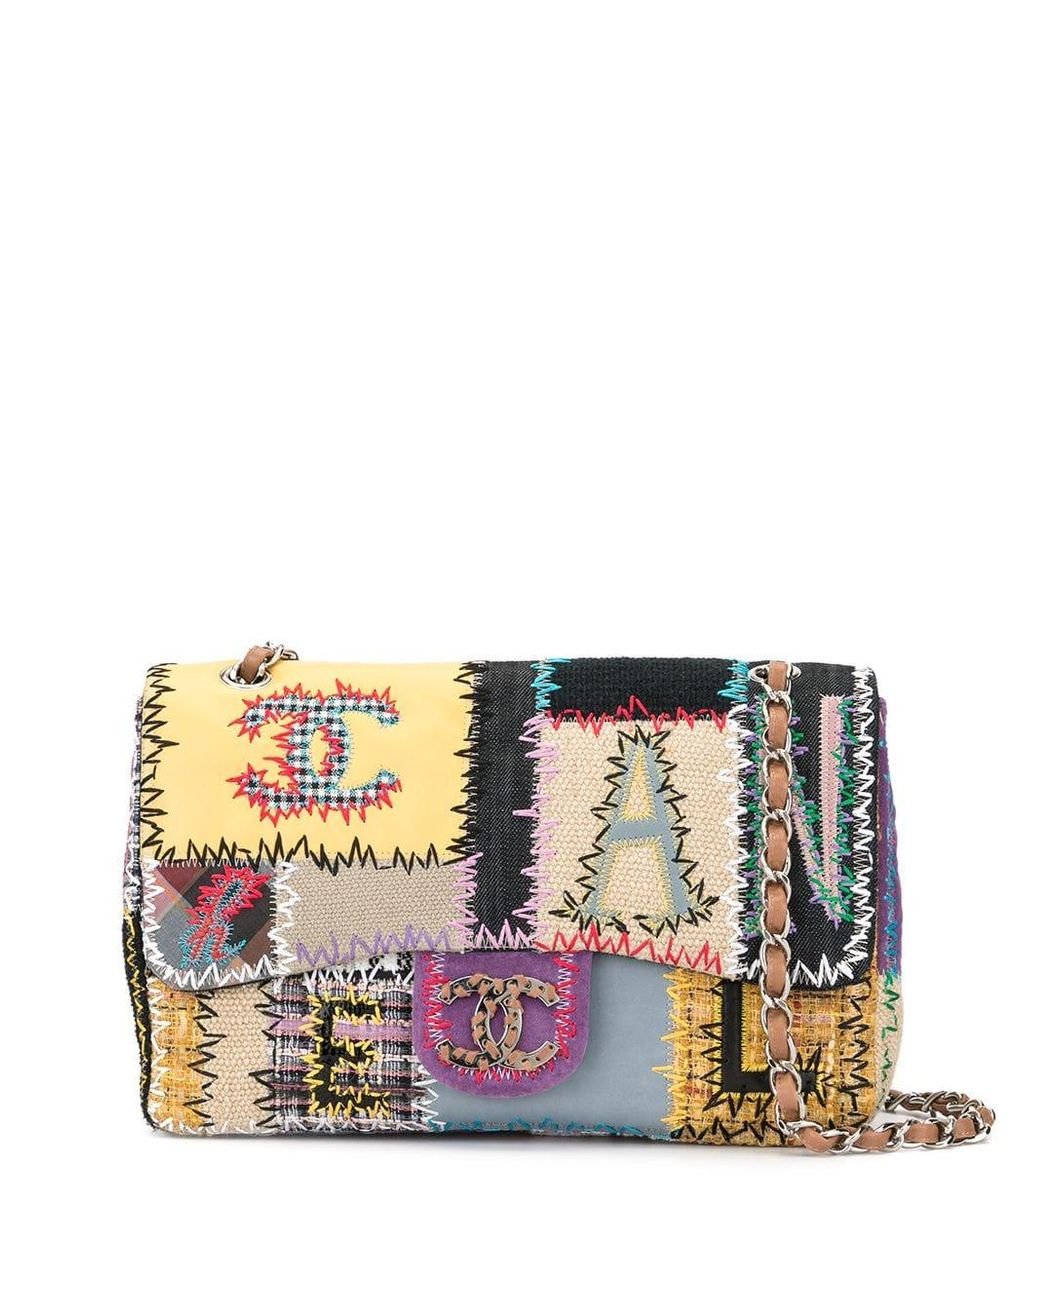 Chanel Pre-Owned Cruise 2011 Patchwork Collection Cc Chain